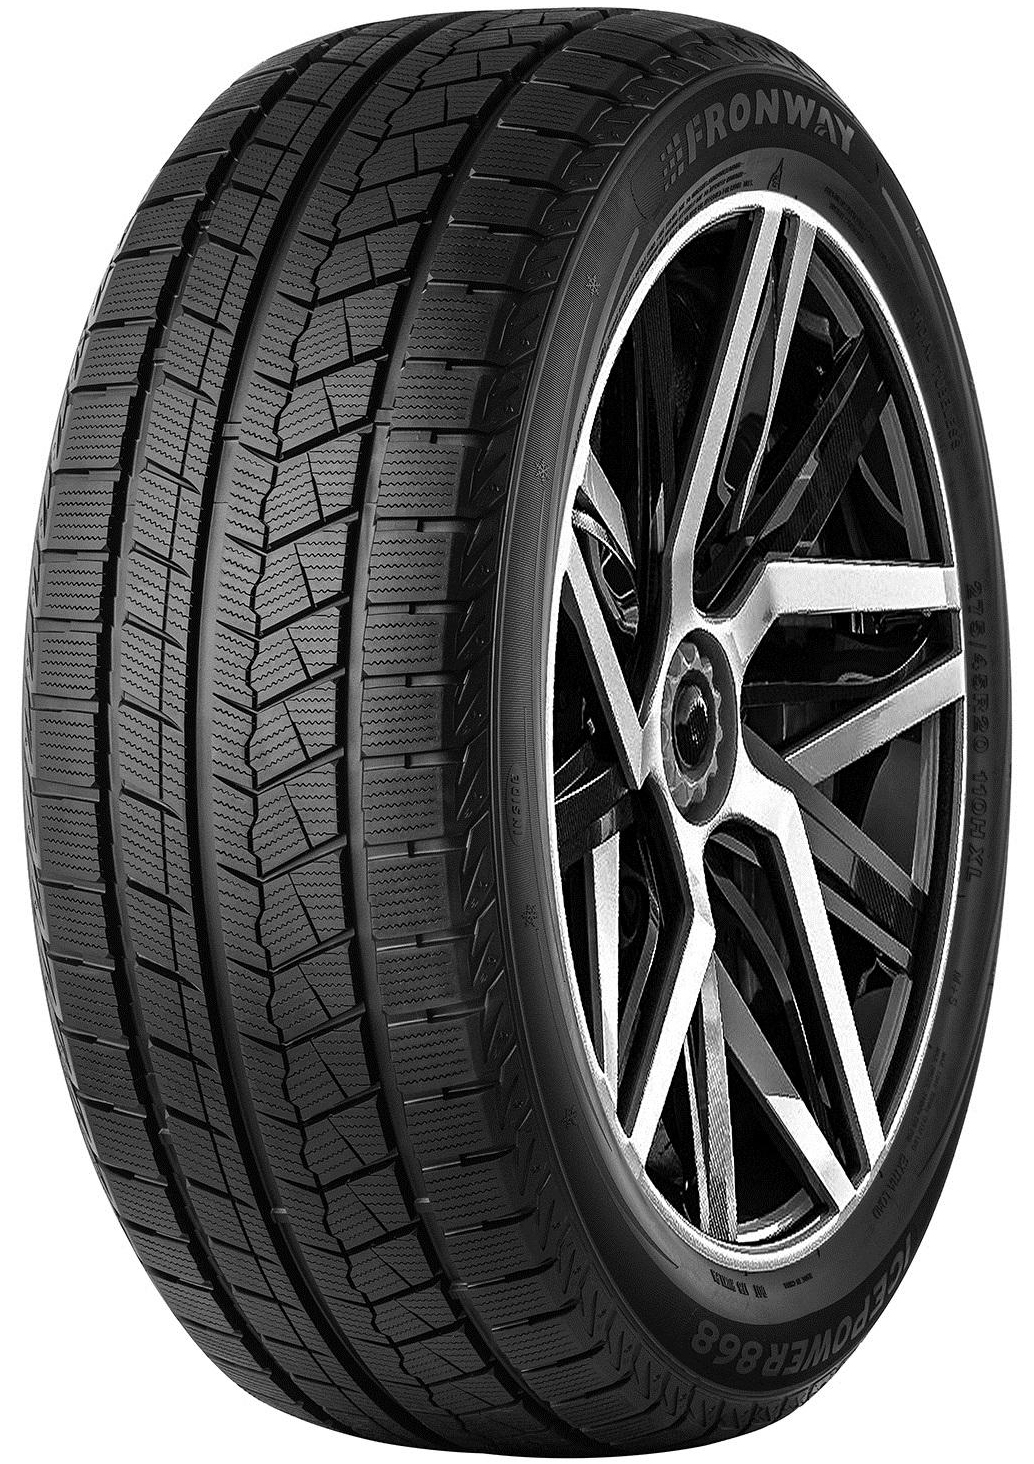    Fronway Icepower 868 225/40 R18 